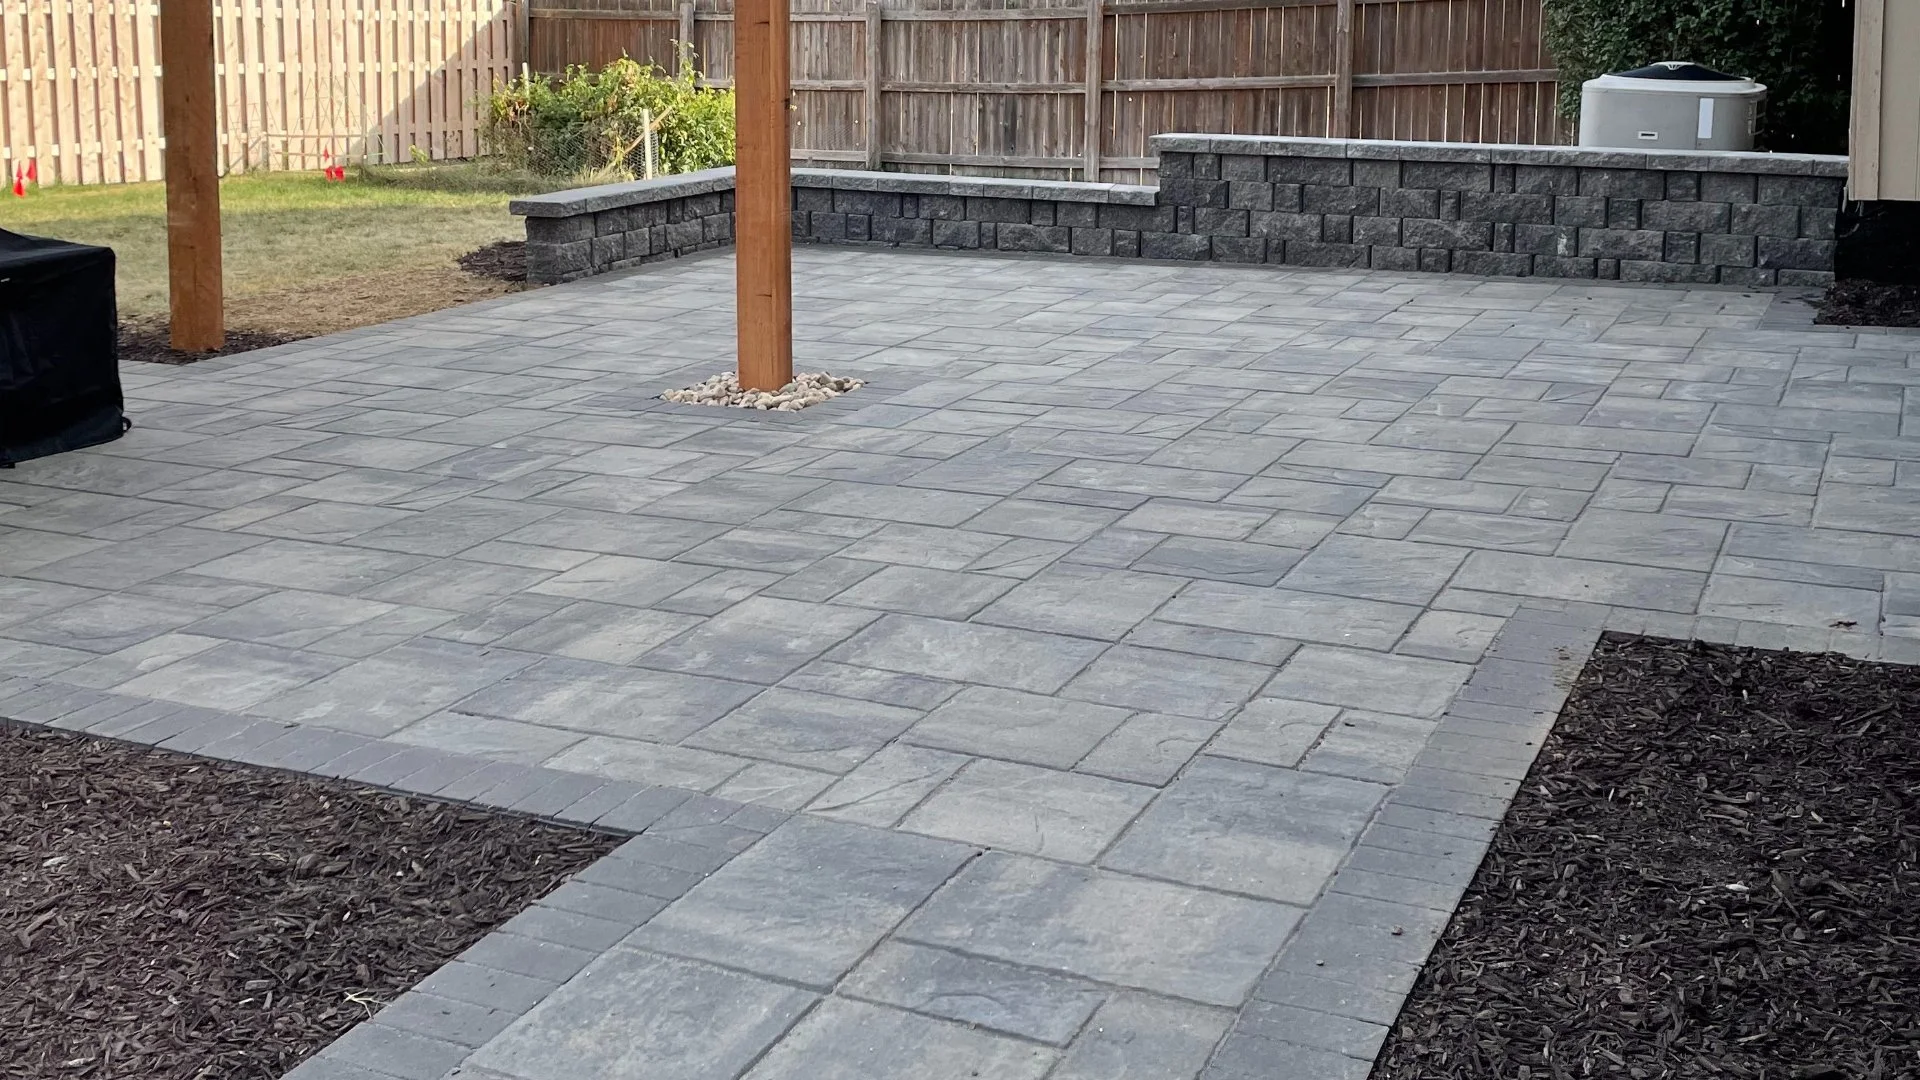 Make Your Patio Unique by Incorporating One of These Paver Patterns